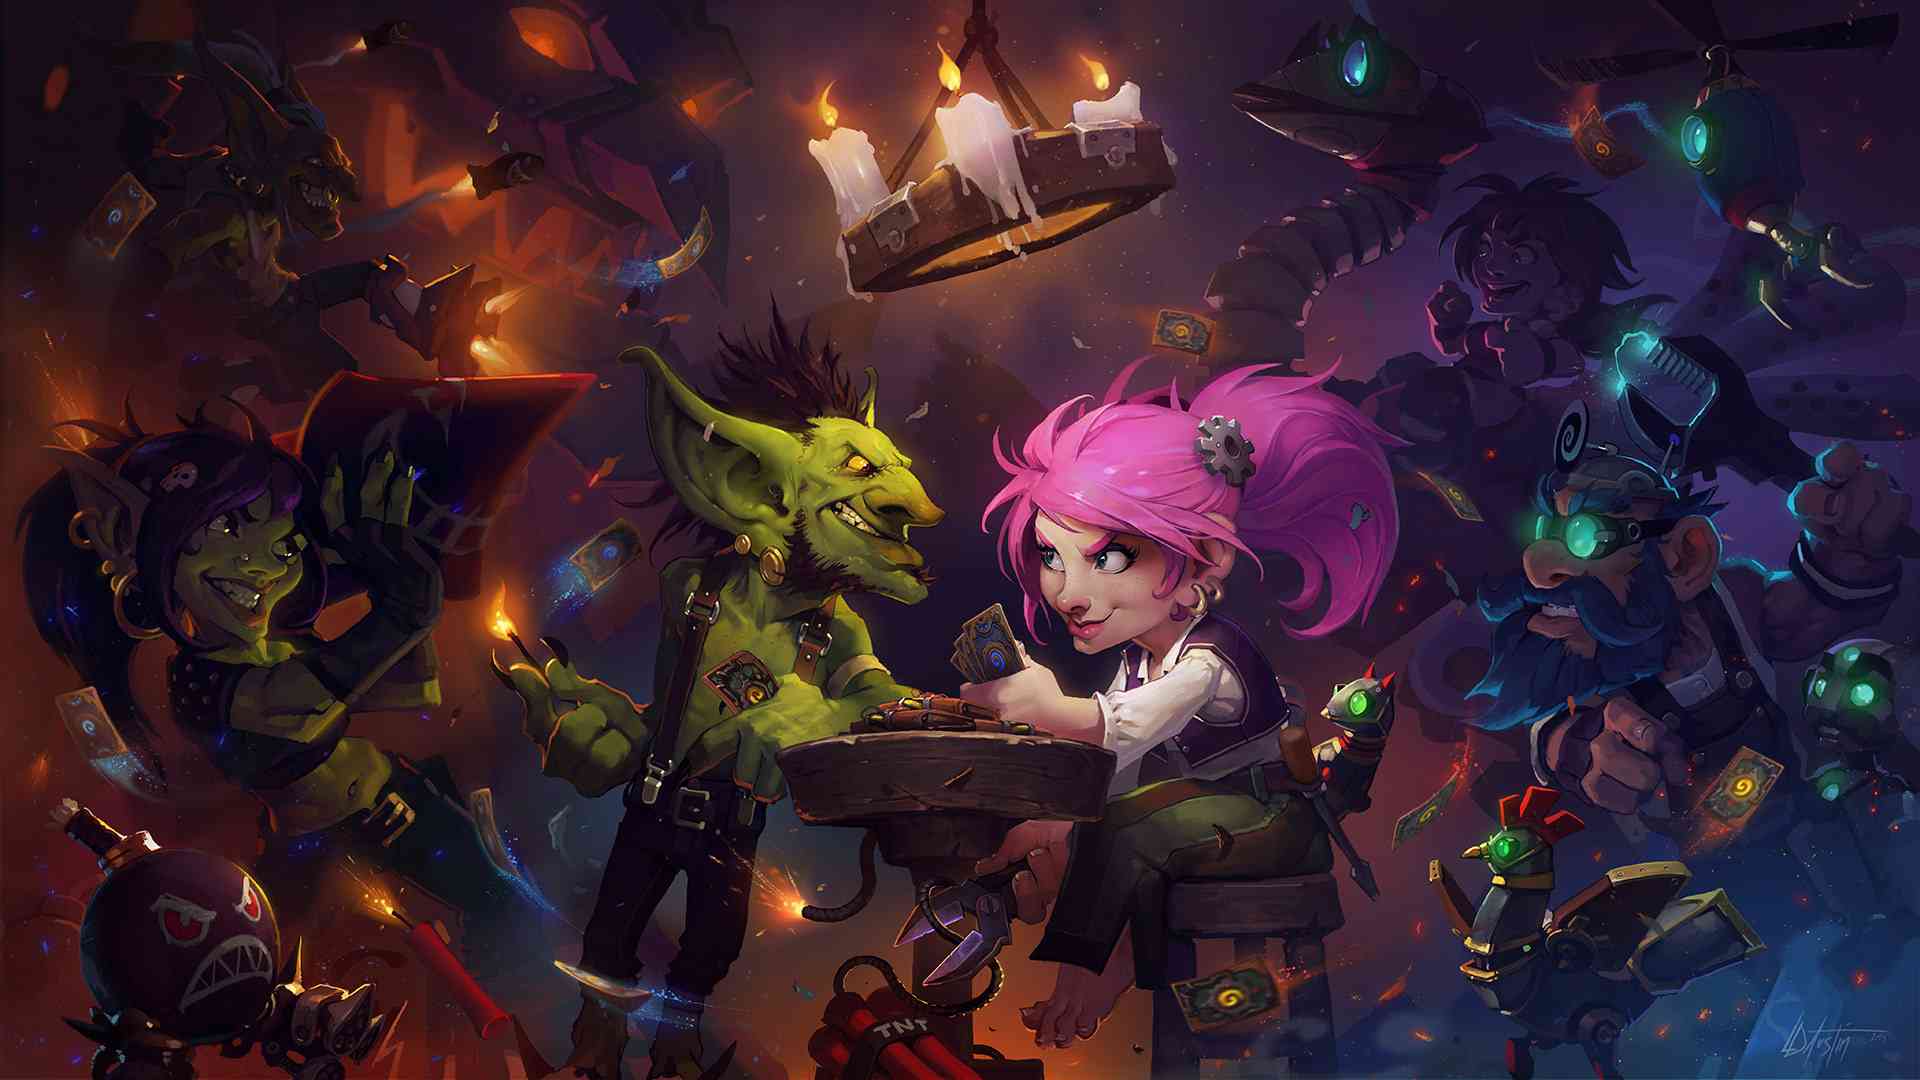 “Goblins vs. Gnomes” Release Date Announced - “Hearthstone” Expansion Slated for Dec. 8 and Dec. 9